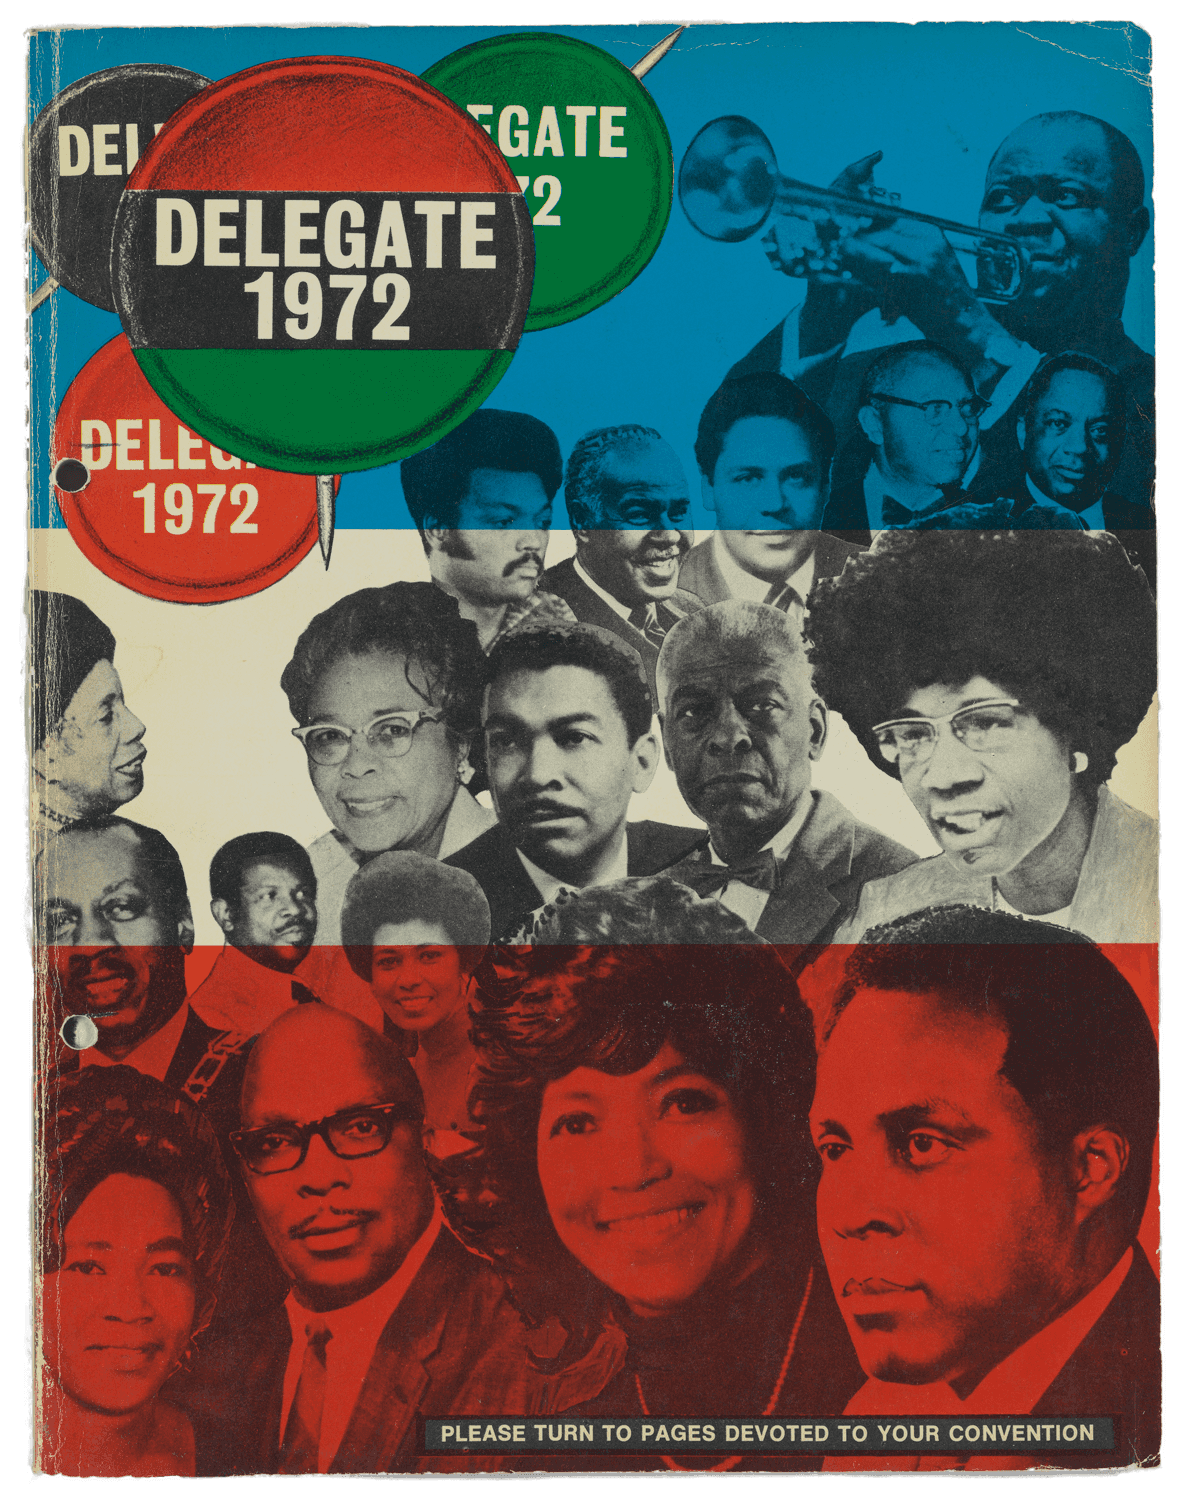 The Delegates of 1972 features many black figures, collaged together under a red, white, and blue overlay.